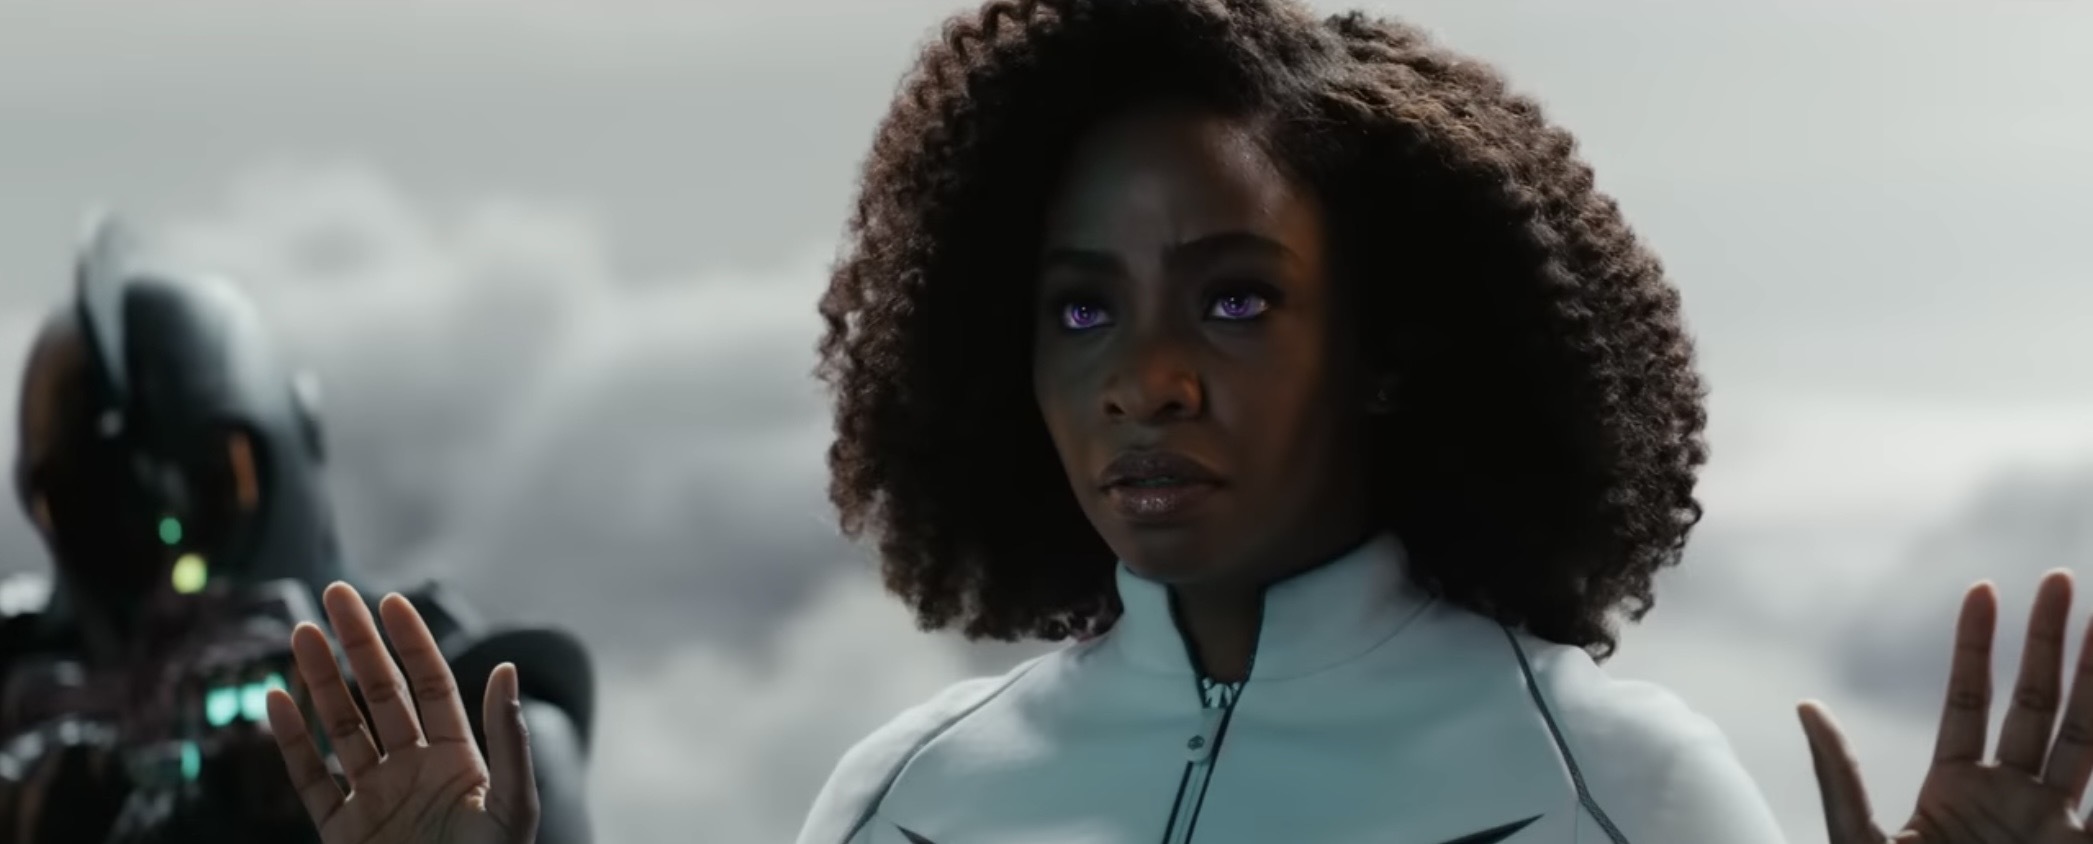 Check out Carol Danvers, Monica Rambeau and Kamala Khan in the first trailer for 'The Marvels'